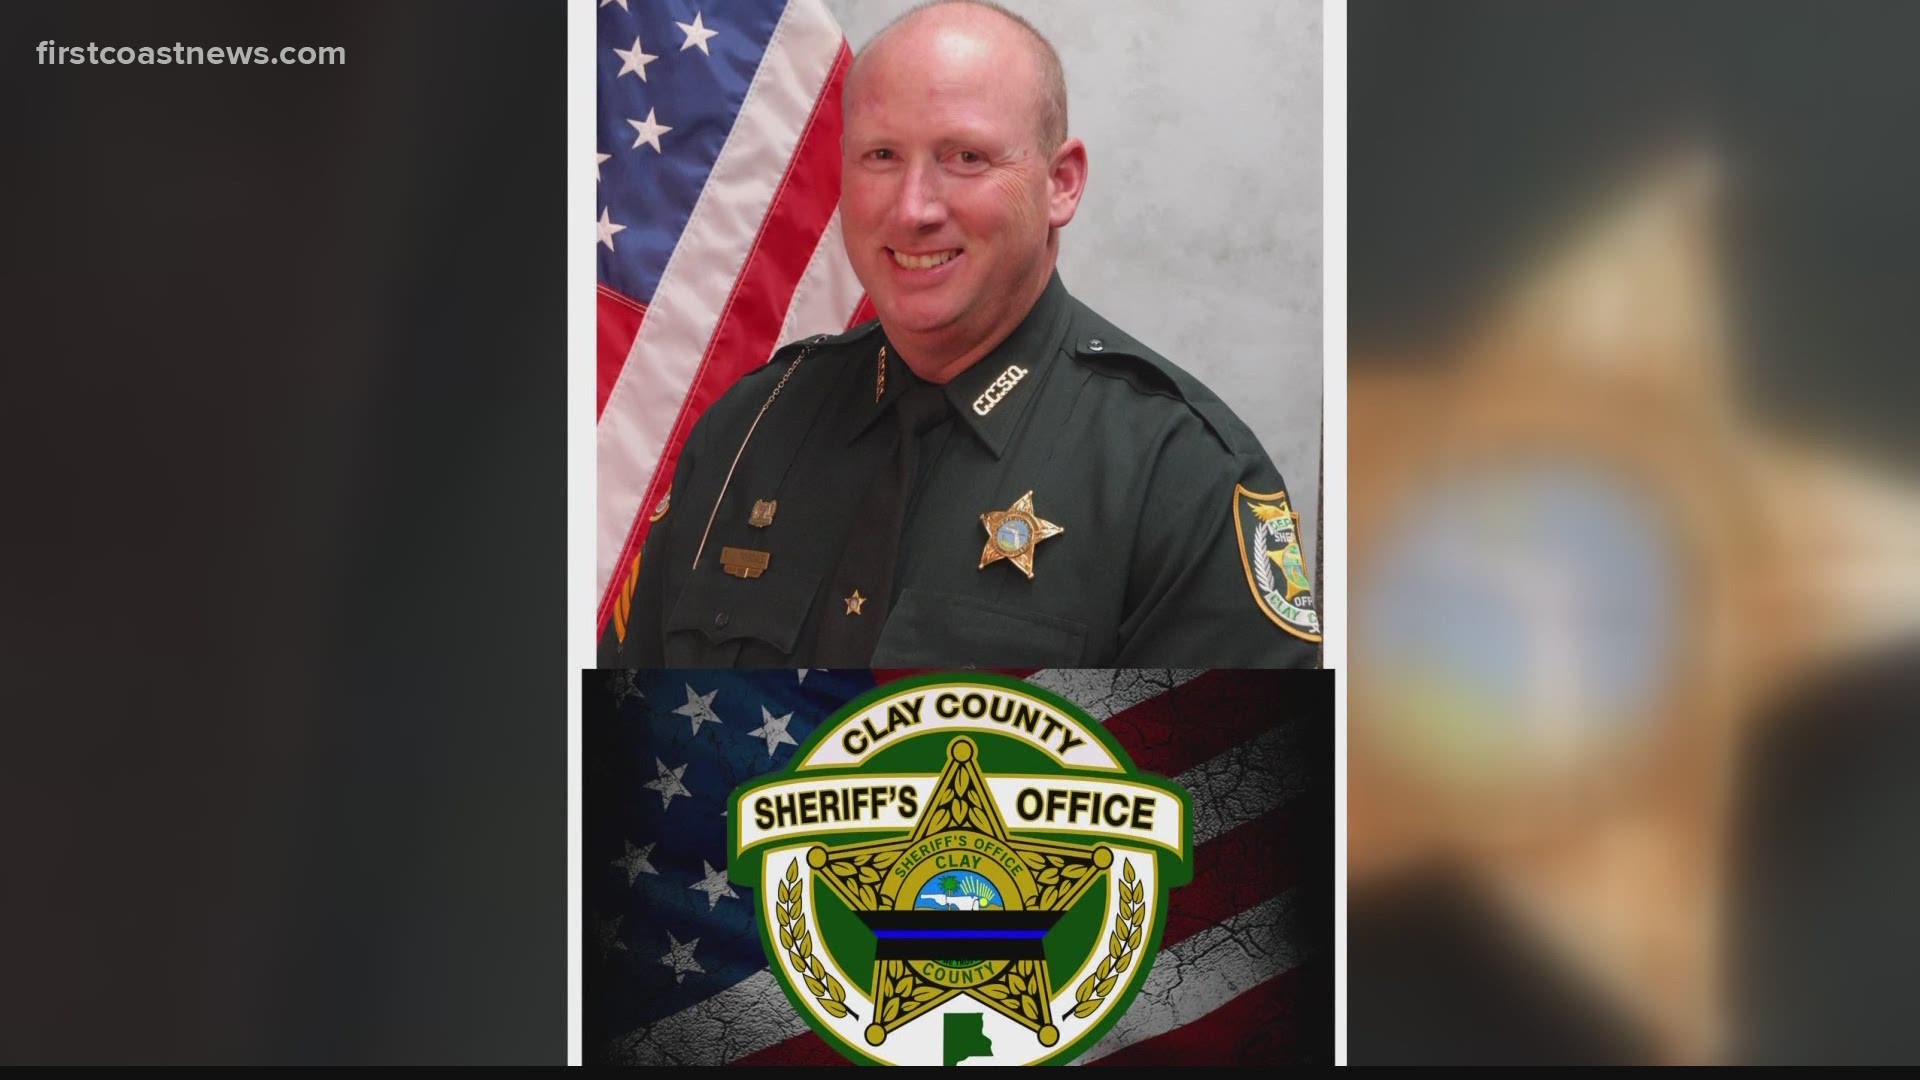 The sheriff's office said Sergeant Eric Twisdale was serving as the supervisor of the Crime Scene Unit at the time of his death.